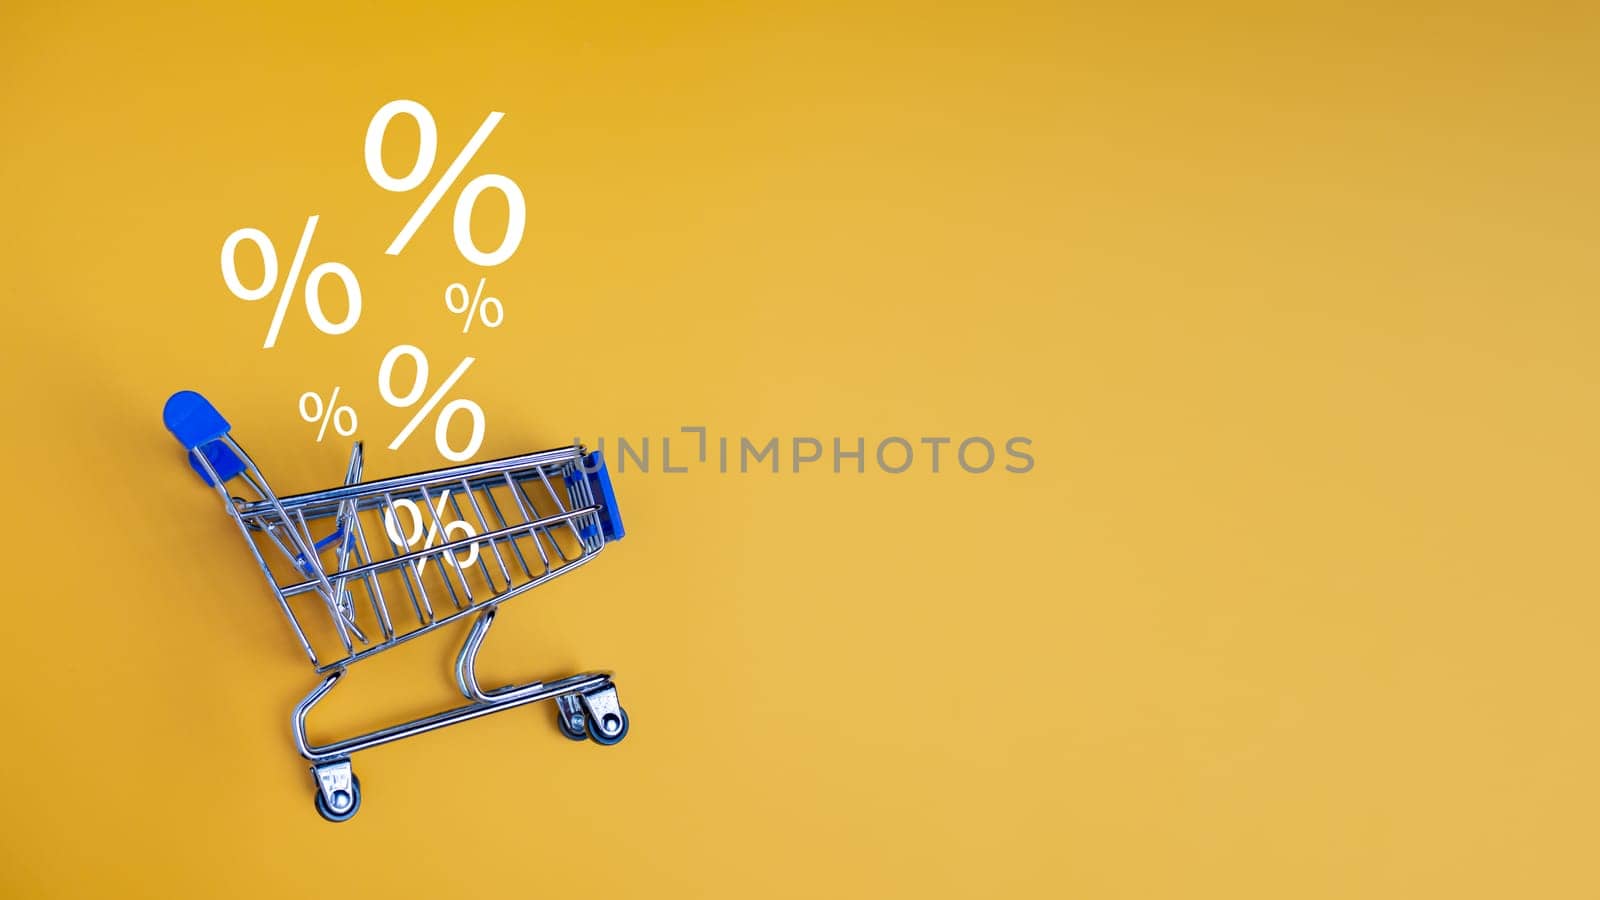 Sale percentage falling in shopping car on yellow background. Shopping online concept, Special price products, Specialand promotion. by Unimages2527